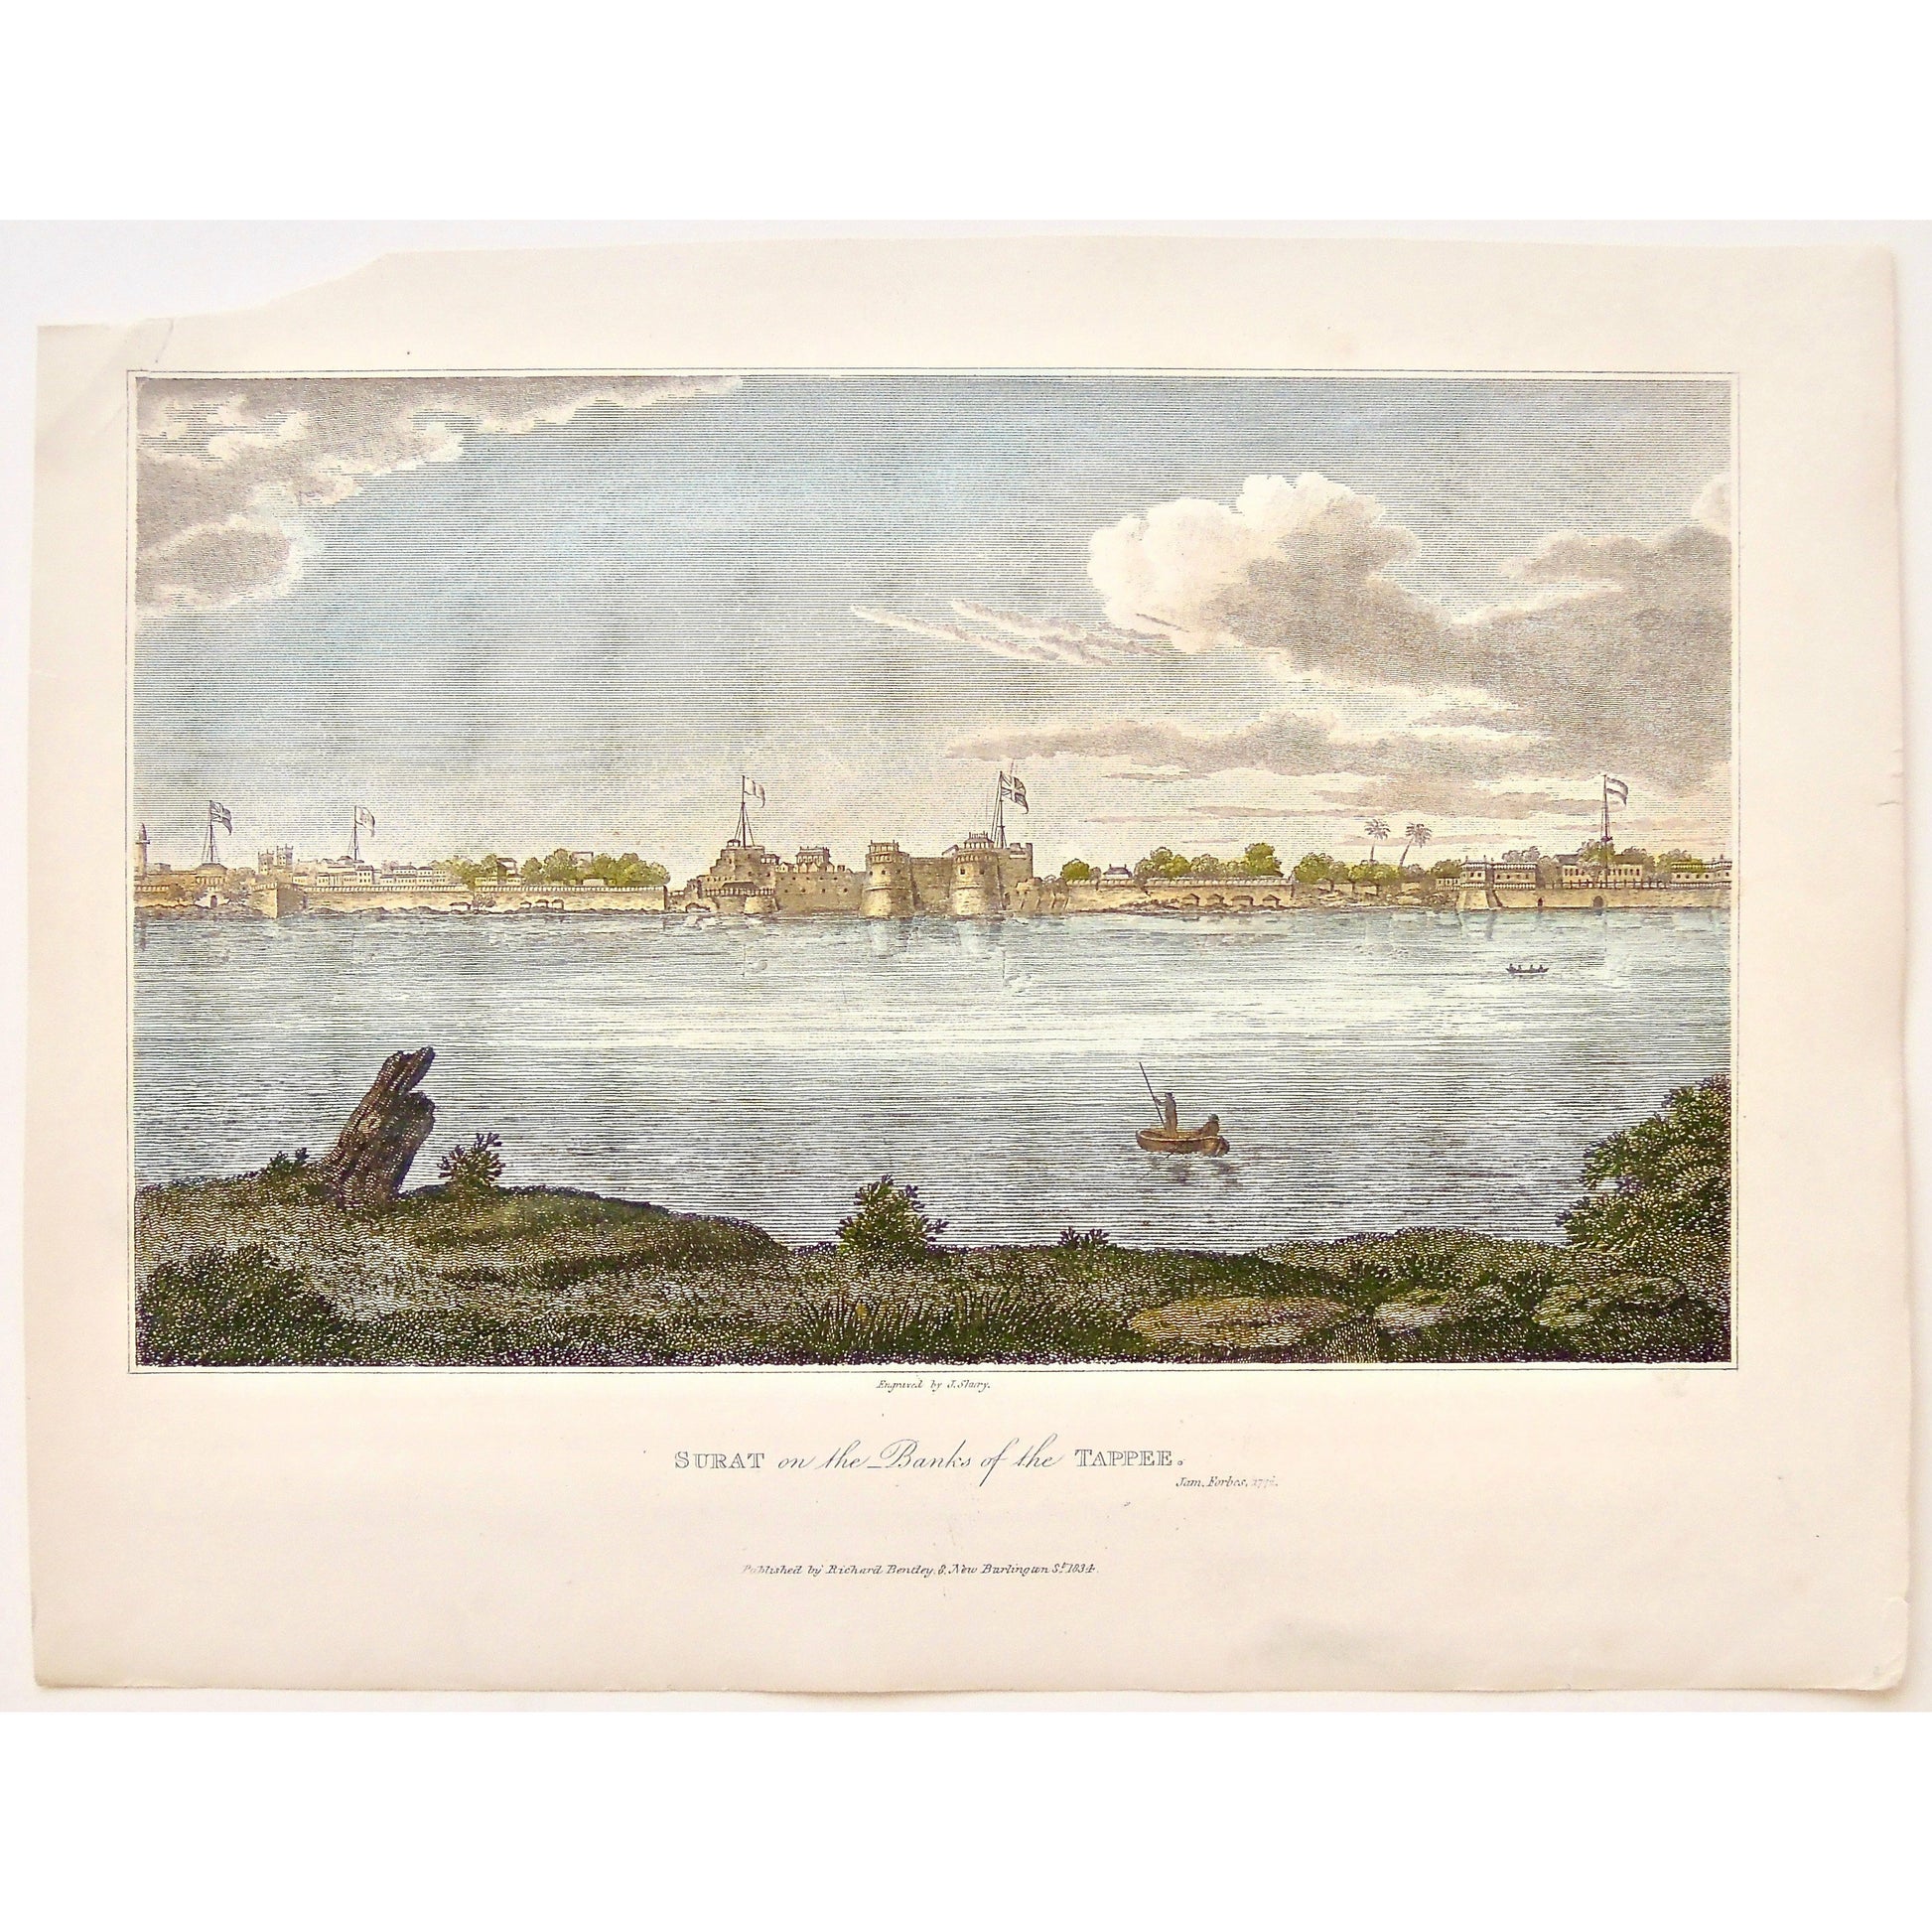 Surat, Surat on the banks of the Tappee, Bans of the Tappee, Tappee, Banks, Fort, Fortress, Flags, India, Indian Castle, Indian Fort, Indian Flags, on the water, James Forbes, Forbes, Eliza Rosée, Countess De Montalembert, Oriental Memoirs, Narrative of Seventeen Years Residence in India, Bentley, 8 New Burlington Street, London, Shury, Nichols & Son, 25 Parliament Street, 1772, 1834, Antique Print, Antique, Prints, Vintage Prints, Vintage, Collector, Collectable, Original, Unique, Rare Map, Rare, Rare boo